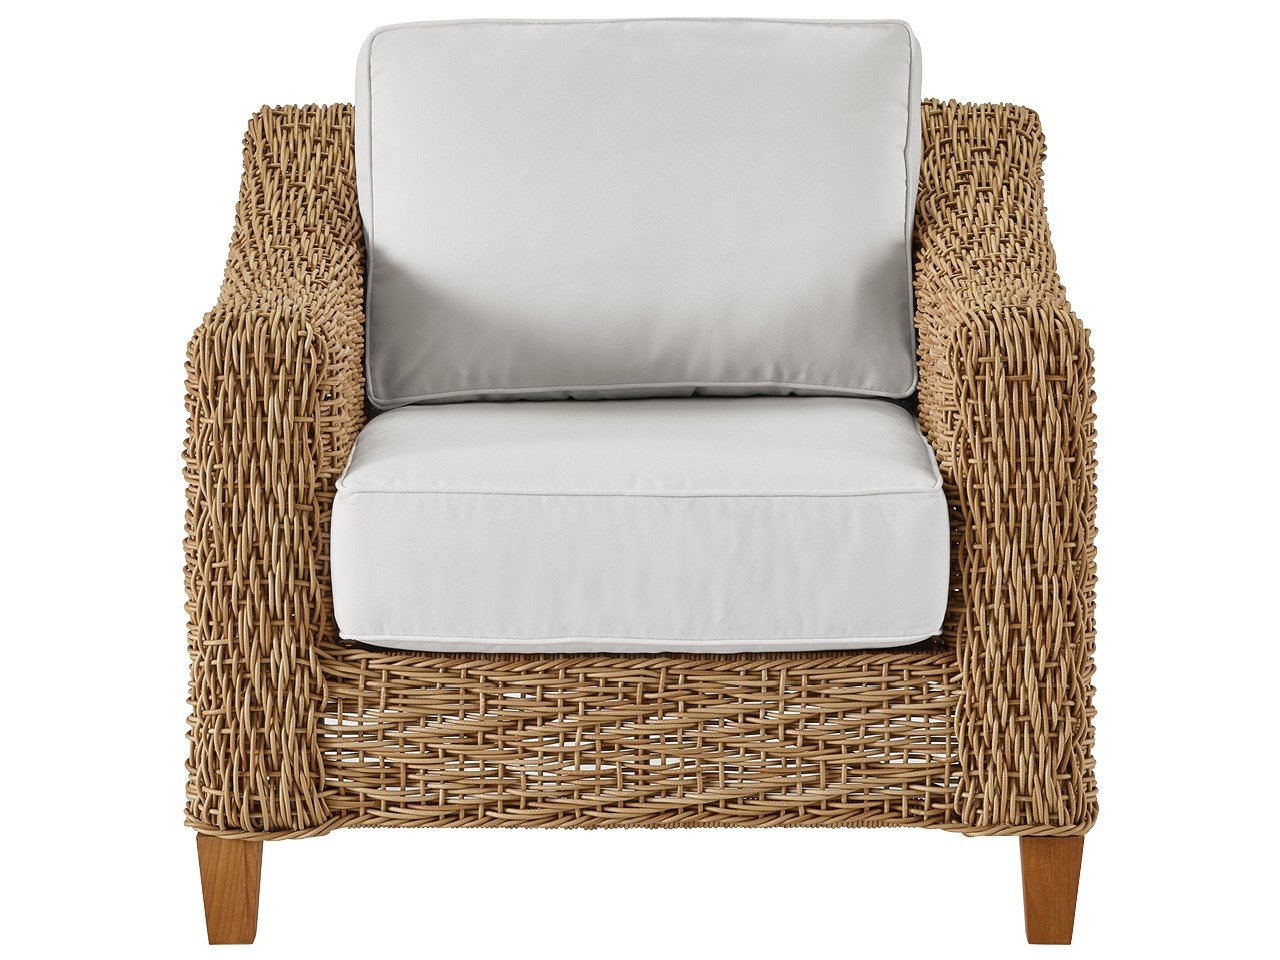 Laconia Lounge Chair